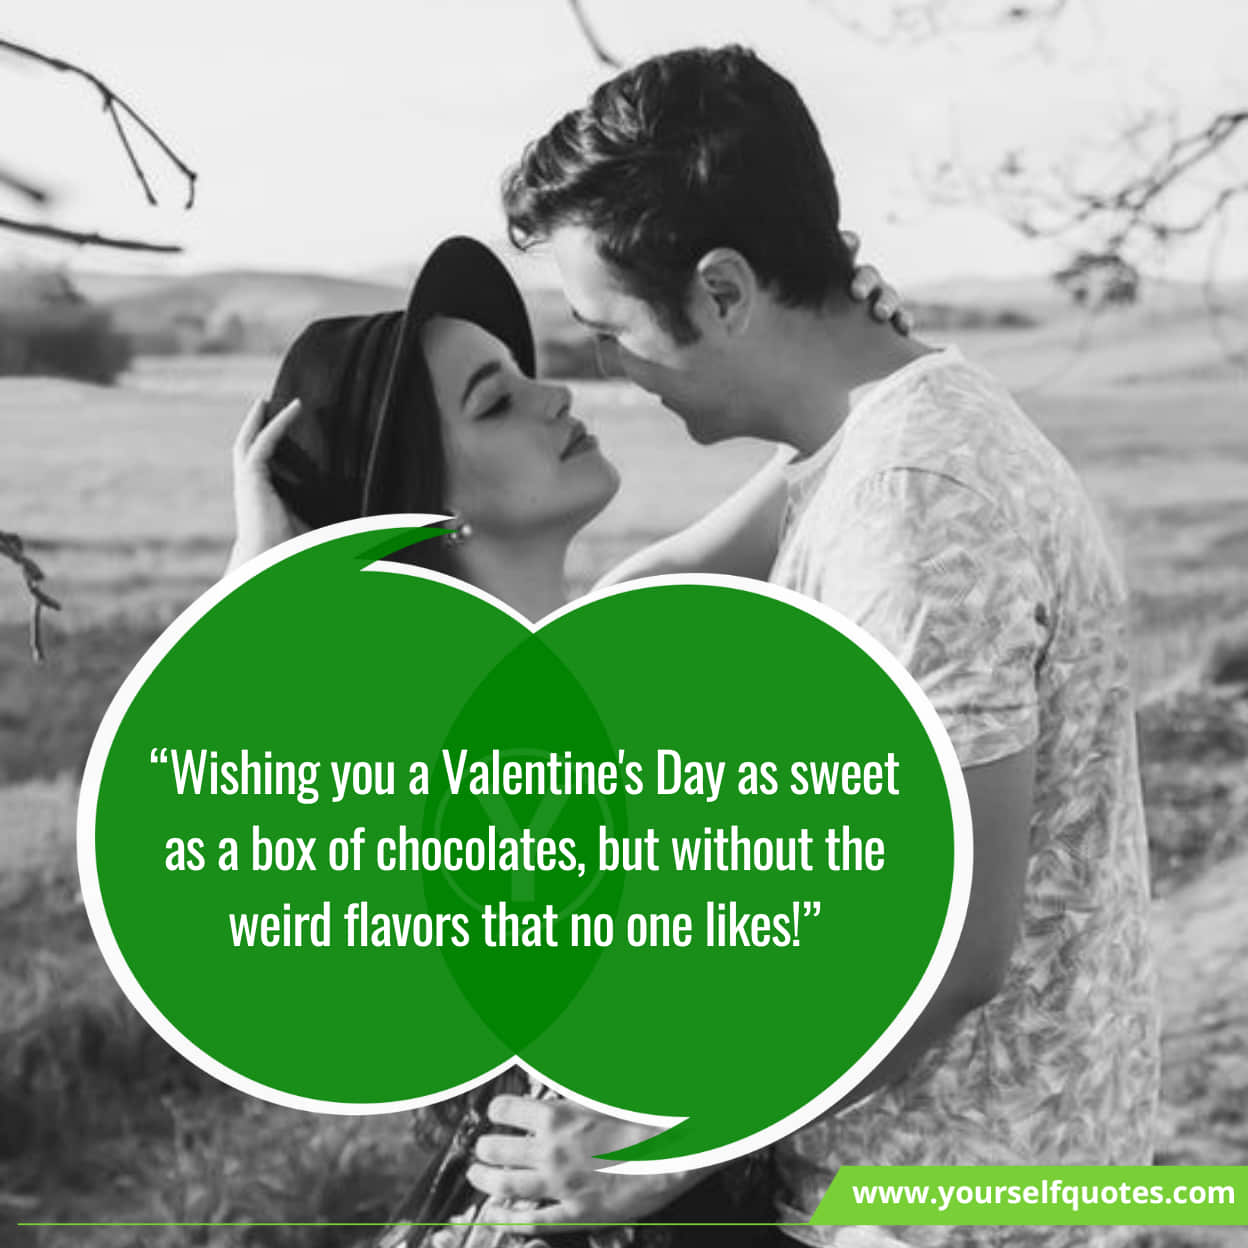 Funny Valentine's Day Wishes for Your Sweetheart